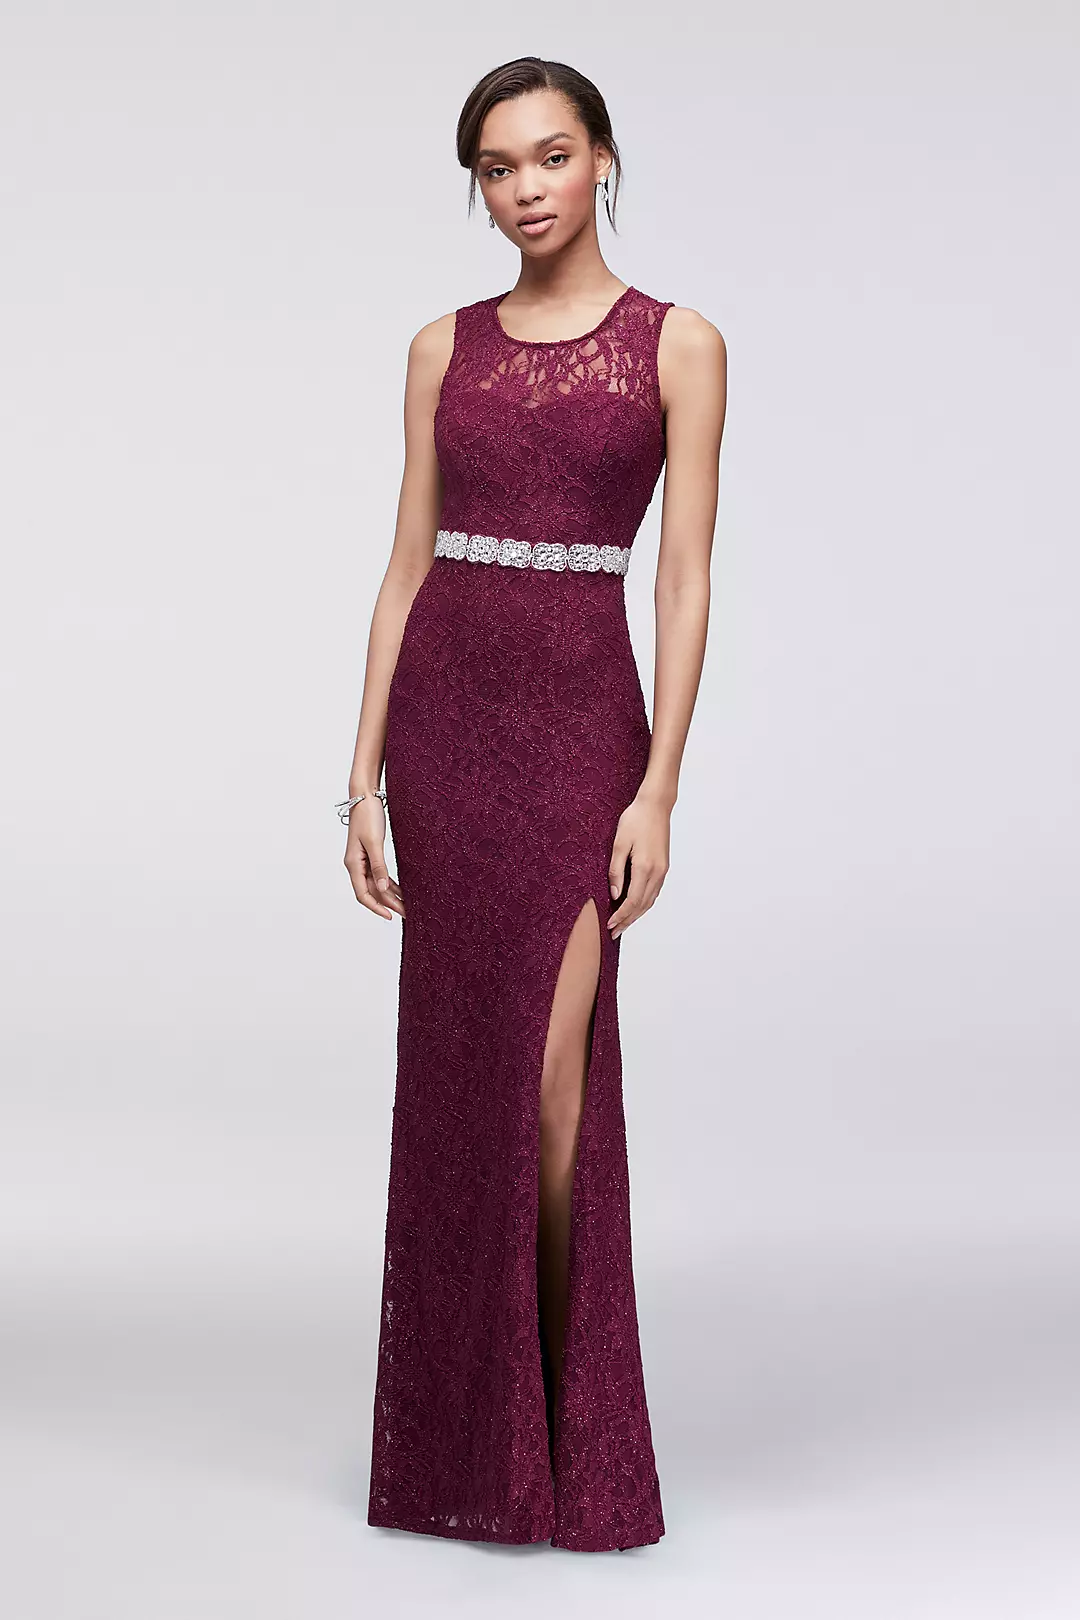 Lace Column Dress with Beaded Waist Image